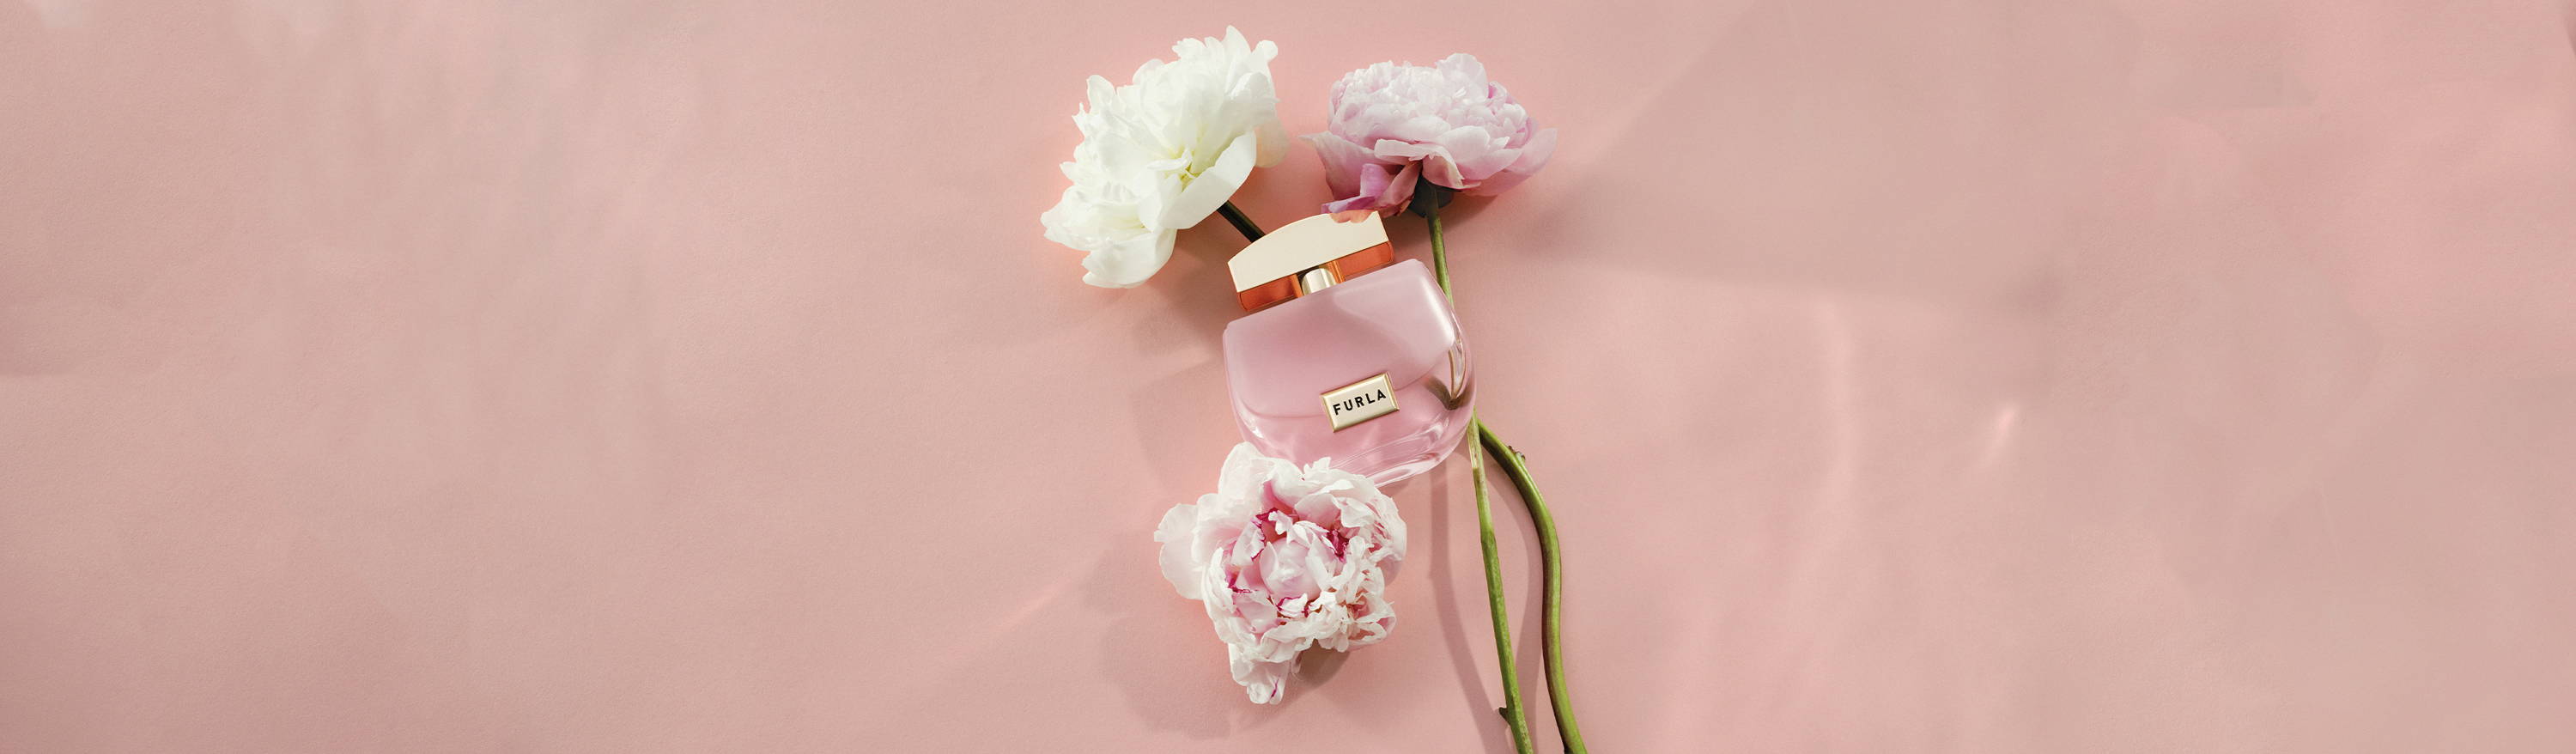 A New Scent is Unveiled